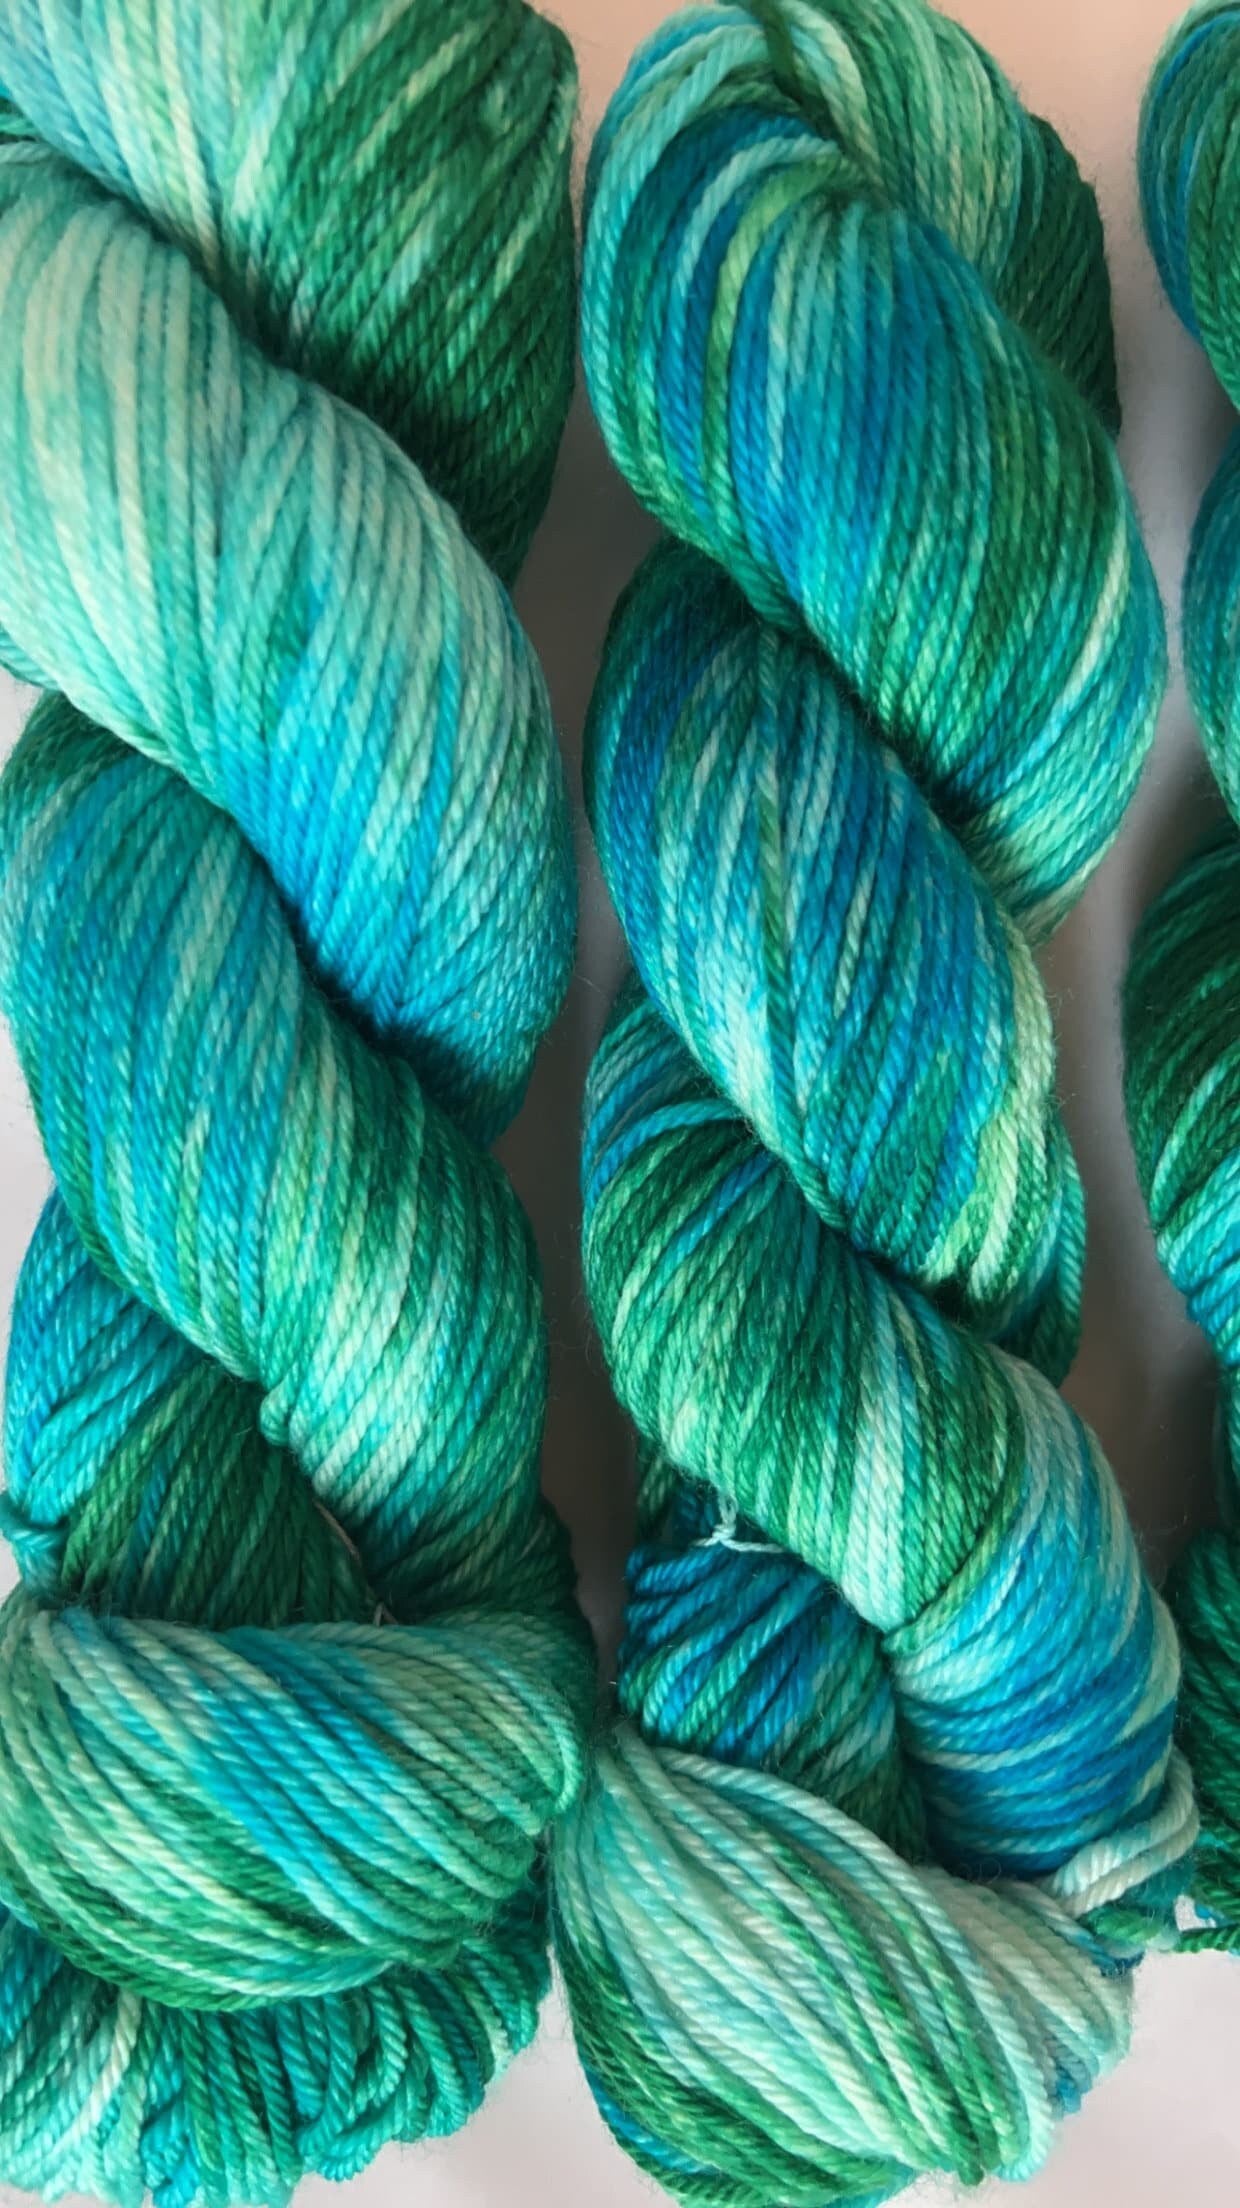 Hand-Dyed Merino Wool Yarn - Soft and Durable Yarn for Knitting and Crocheting | Indie Dyed Merino Wool | Worsted | Rainbow on the Sea